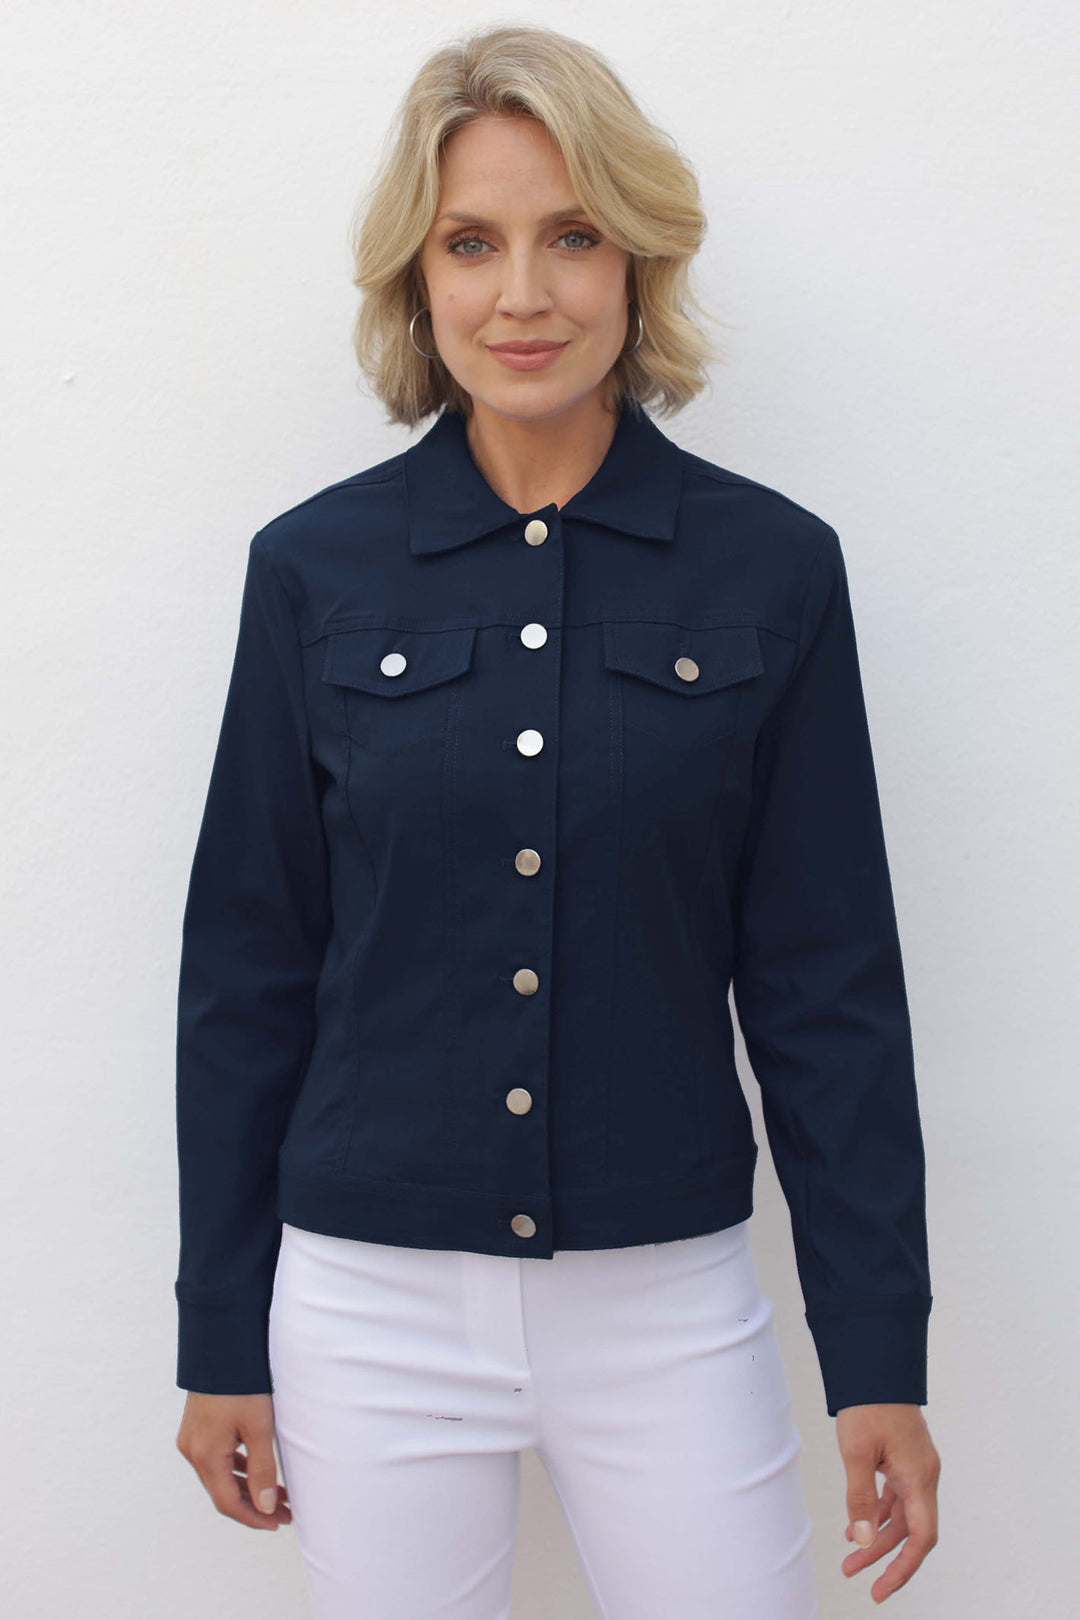 Pomodoro 42400 Navy Jean Jacket - Rouge Boutique Inverness